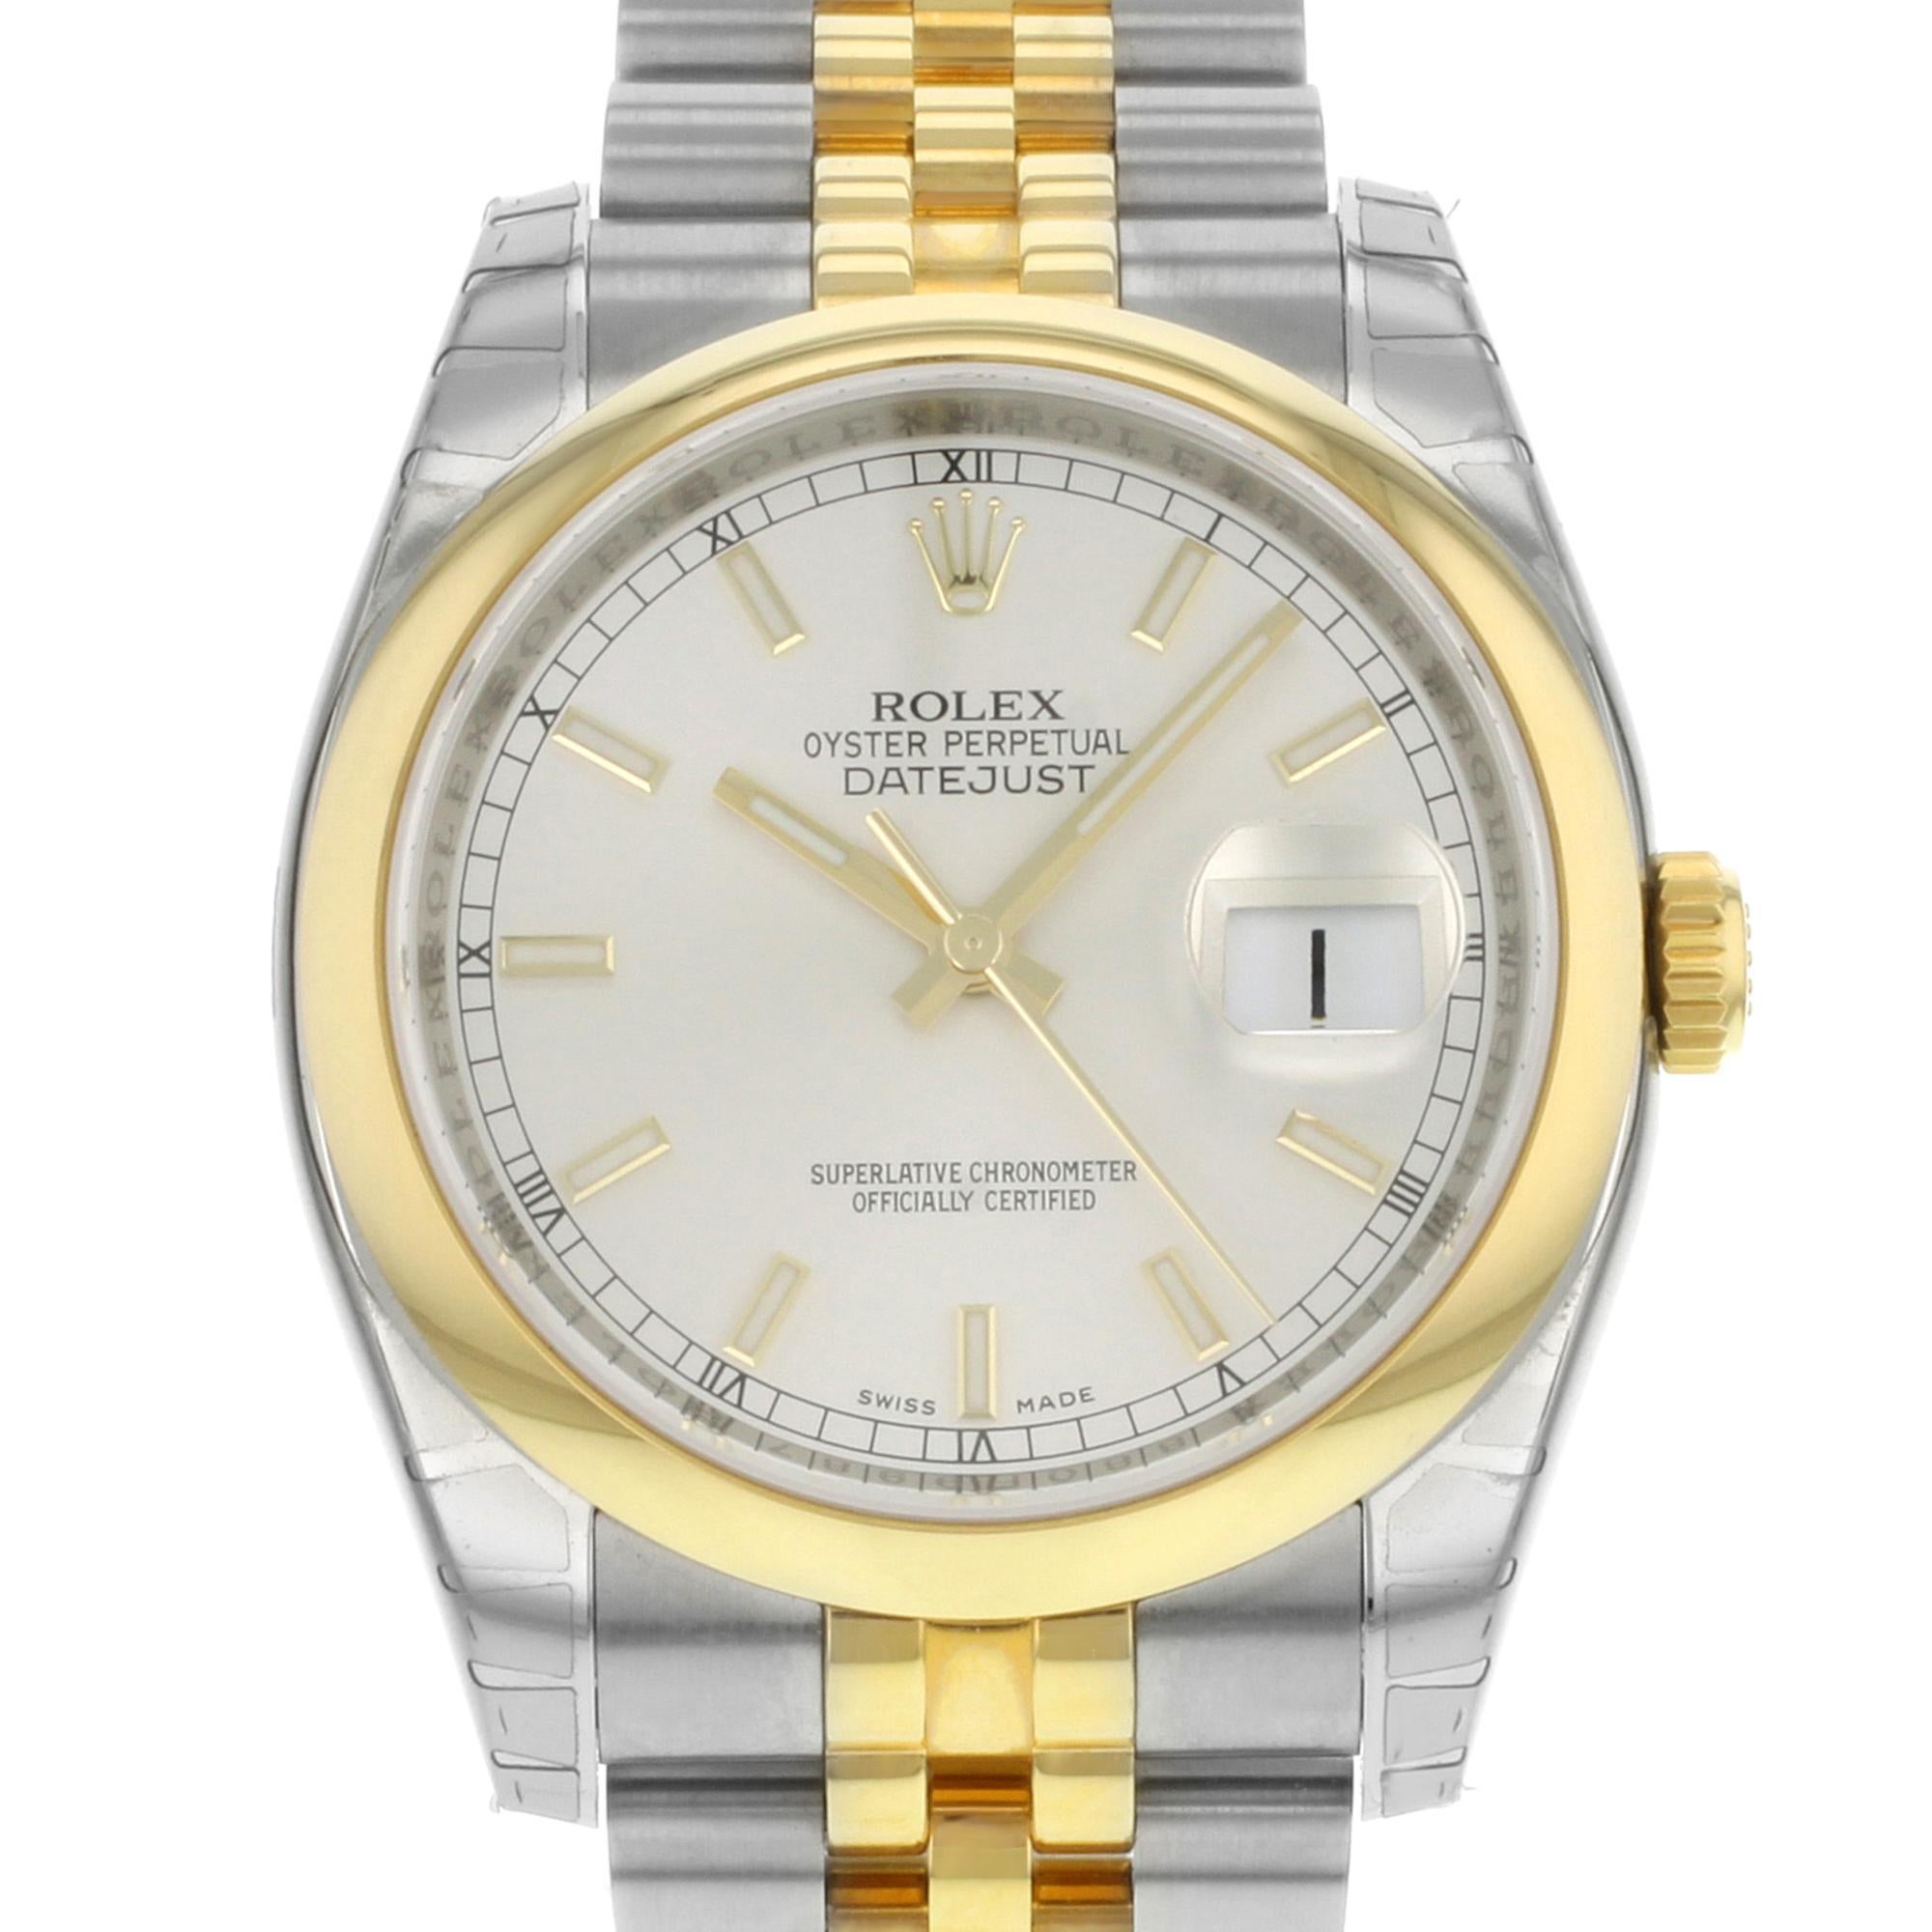 This display model Rolex Datejust  116203 SSJ is a beautiful men's timepiece that is powered by mechanical (automatic) movement which is cased in a stainless steel case. It has a round shape face, date indicator dial and has hand sticks style